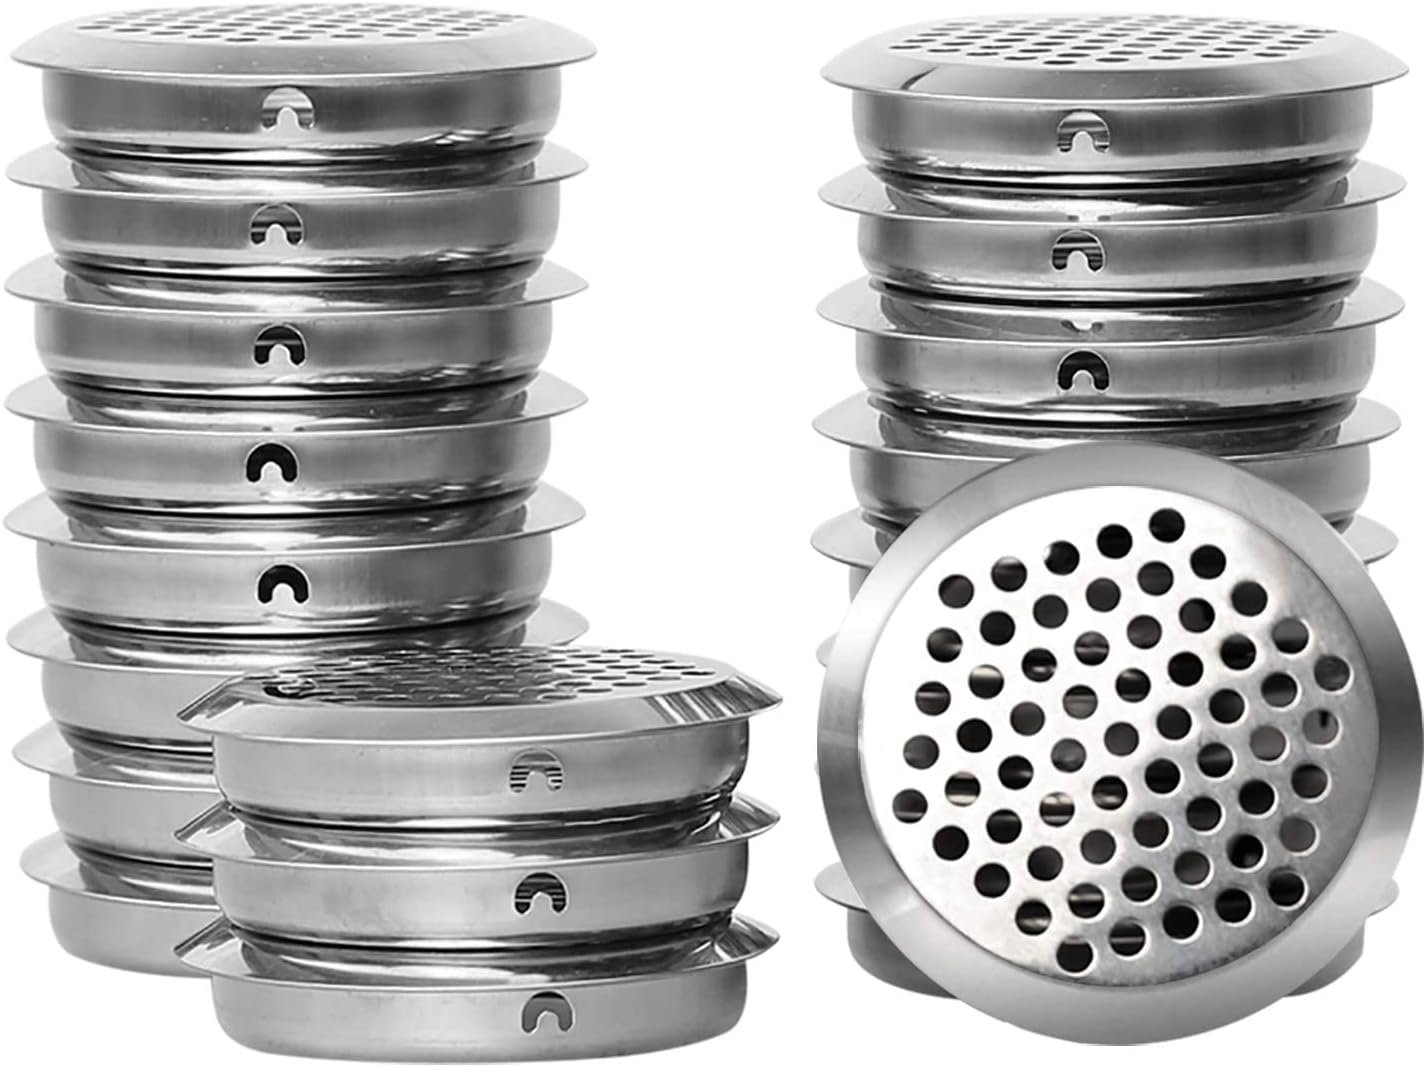 20 pcs Stainless Steel Air Vent Hole Round Ventilation Grille for Shoe Cabinets